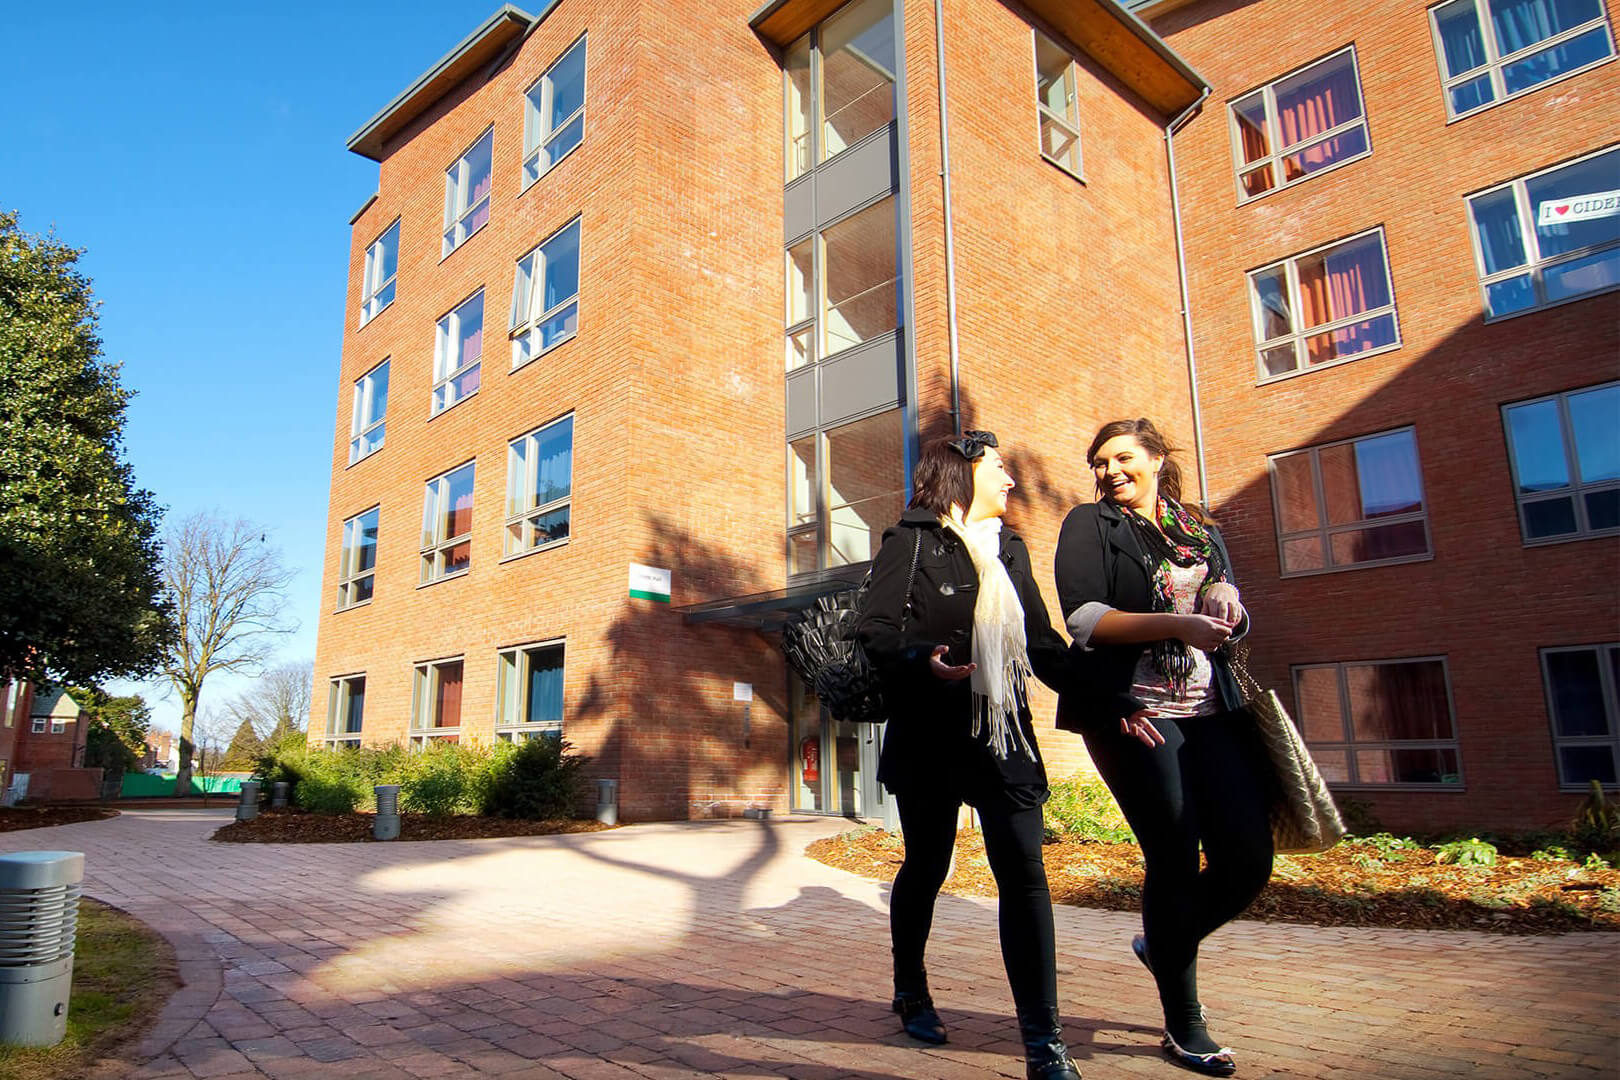 An image of two people walking past one of the accomodation blocks at Edge Hill University. The image is set in the day.